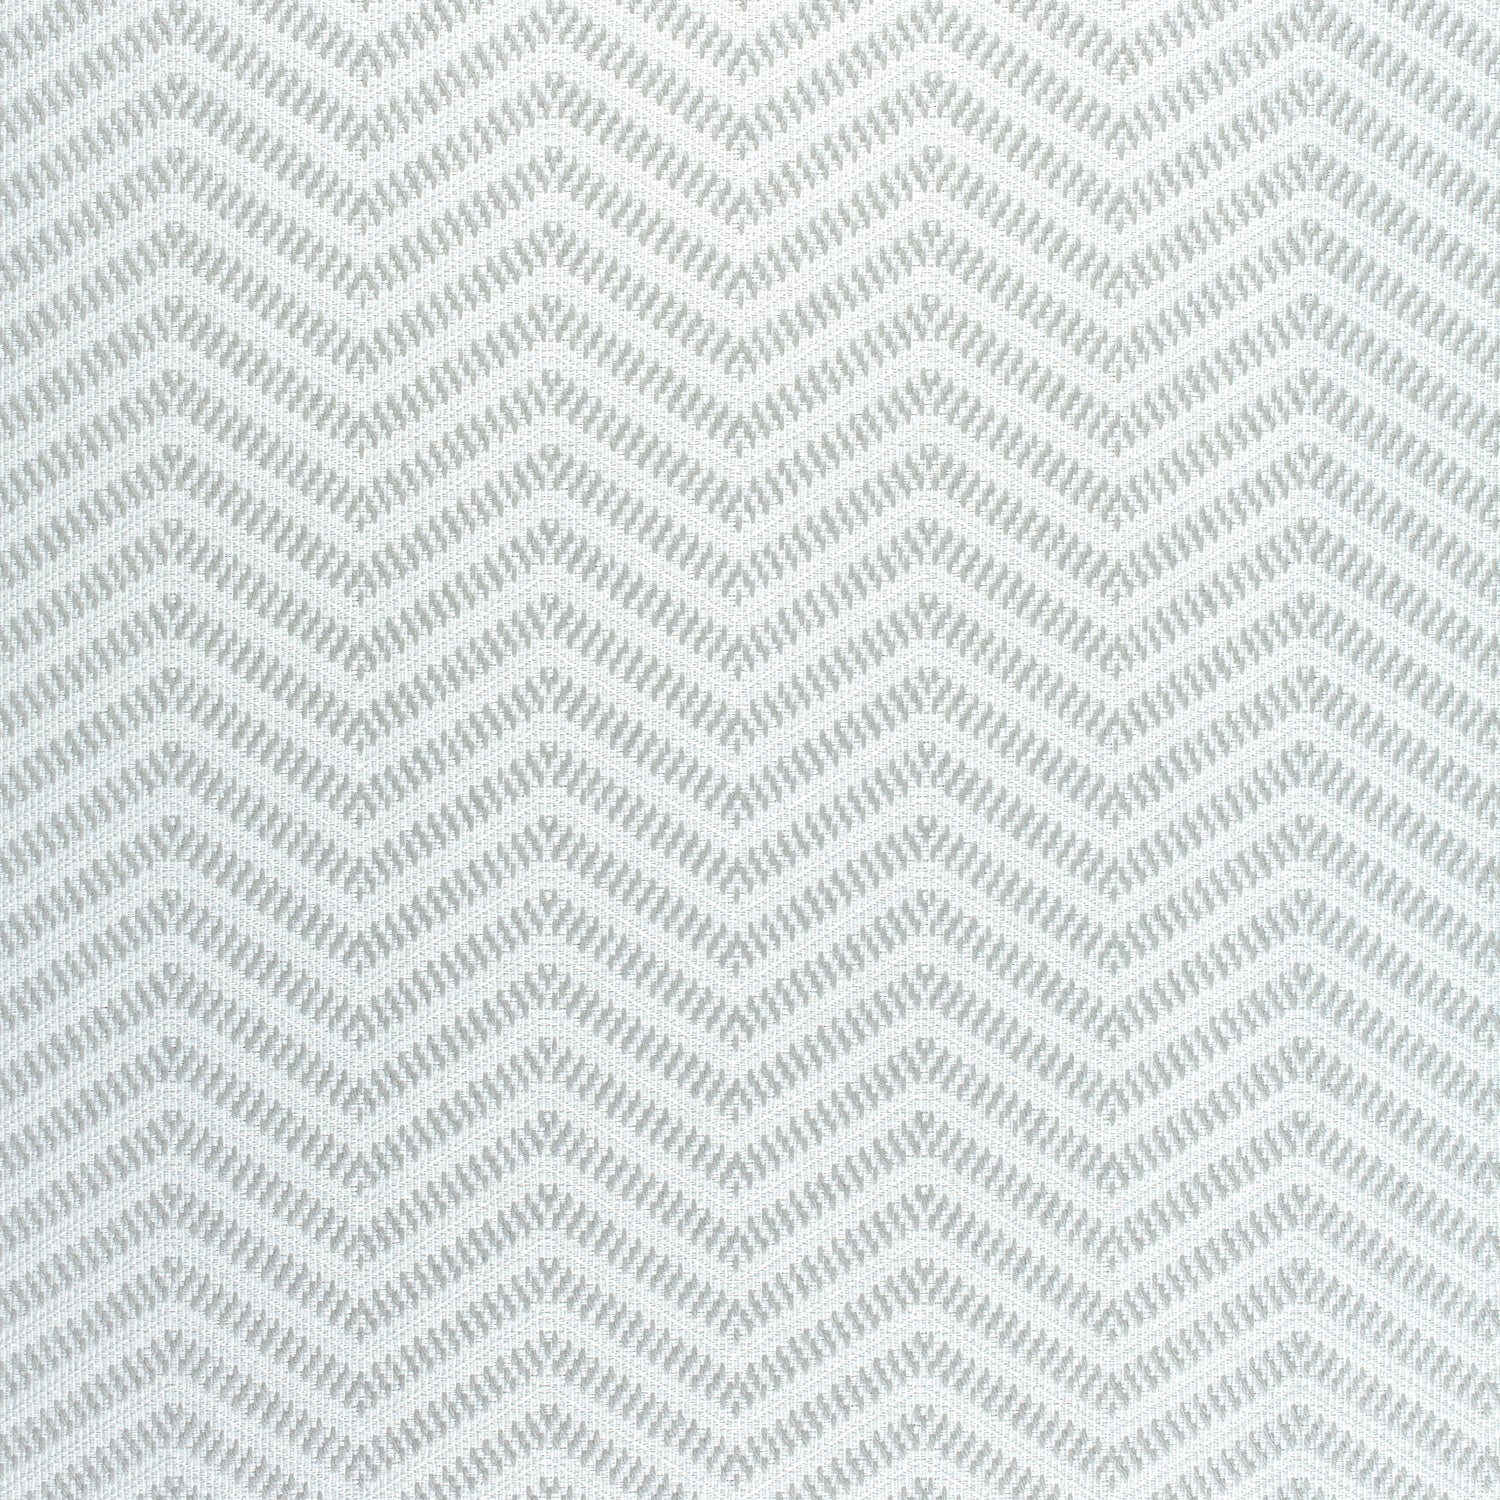 Matari Chevron fabric in sterling grey color - pattern number W80630 - by Thibaut in the Pinnacle collection